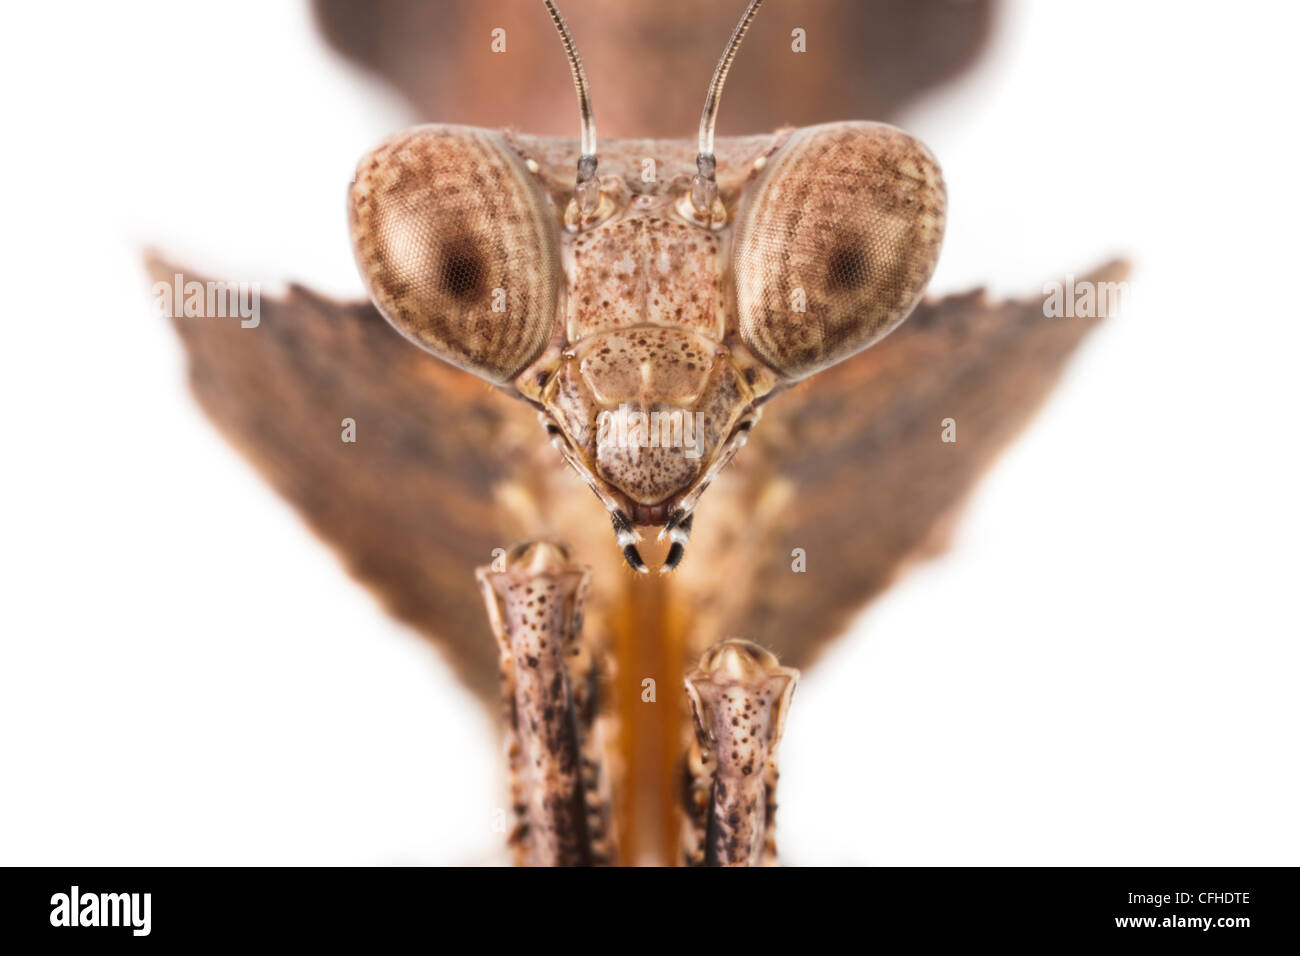 Dead Leaf Mantis, close up of head. Captive, originating from South East Asia. Stock Photo